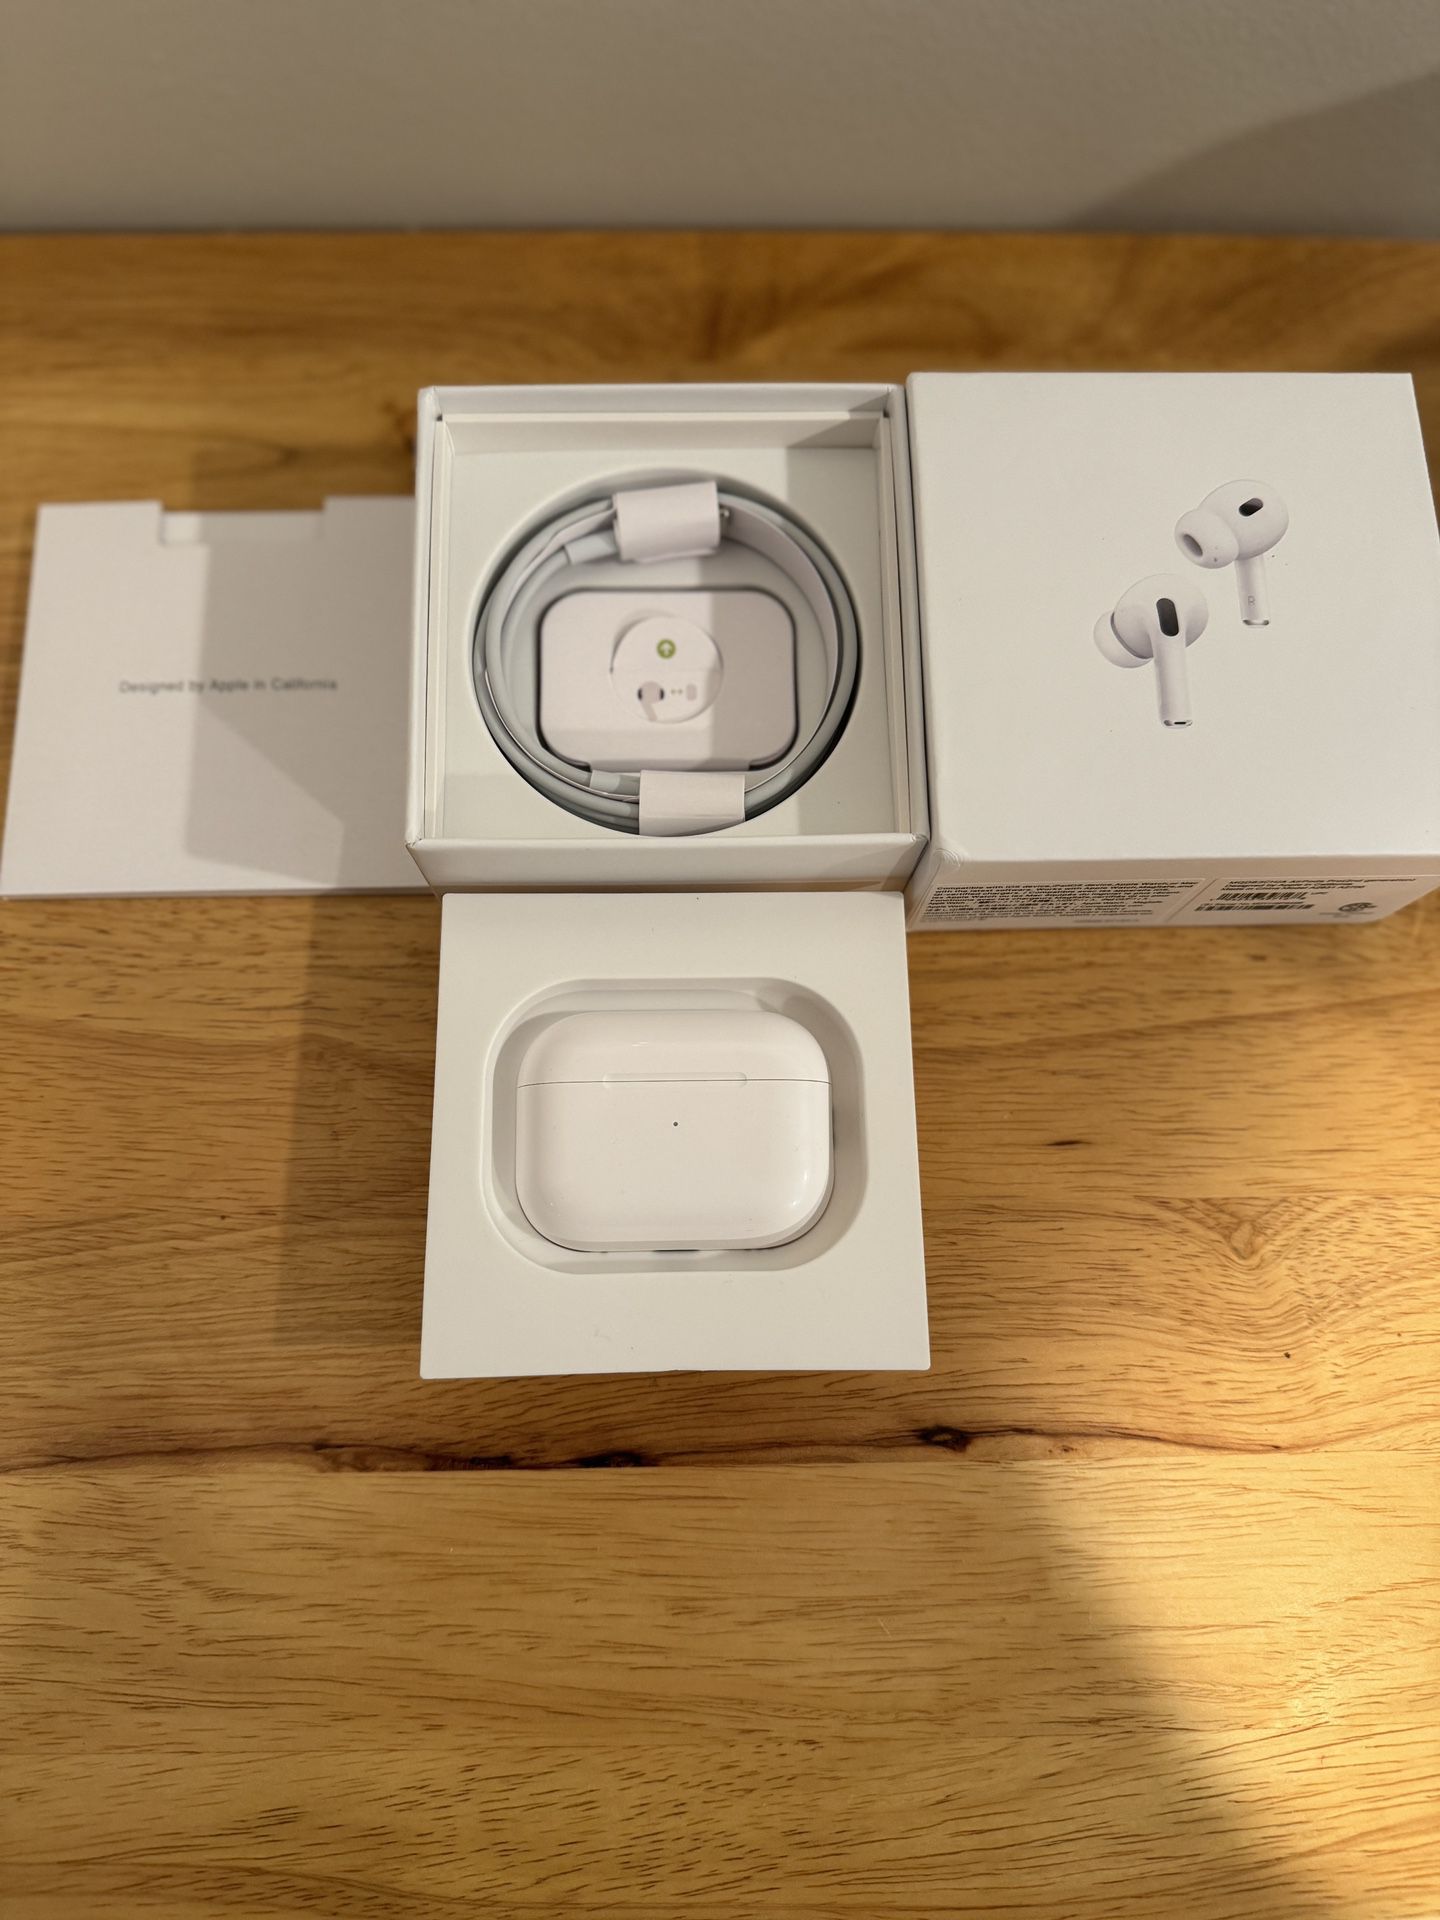 Airpods pro generation 2 